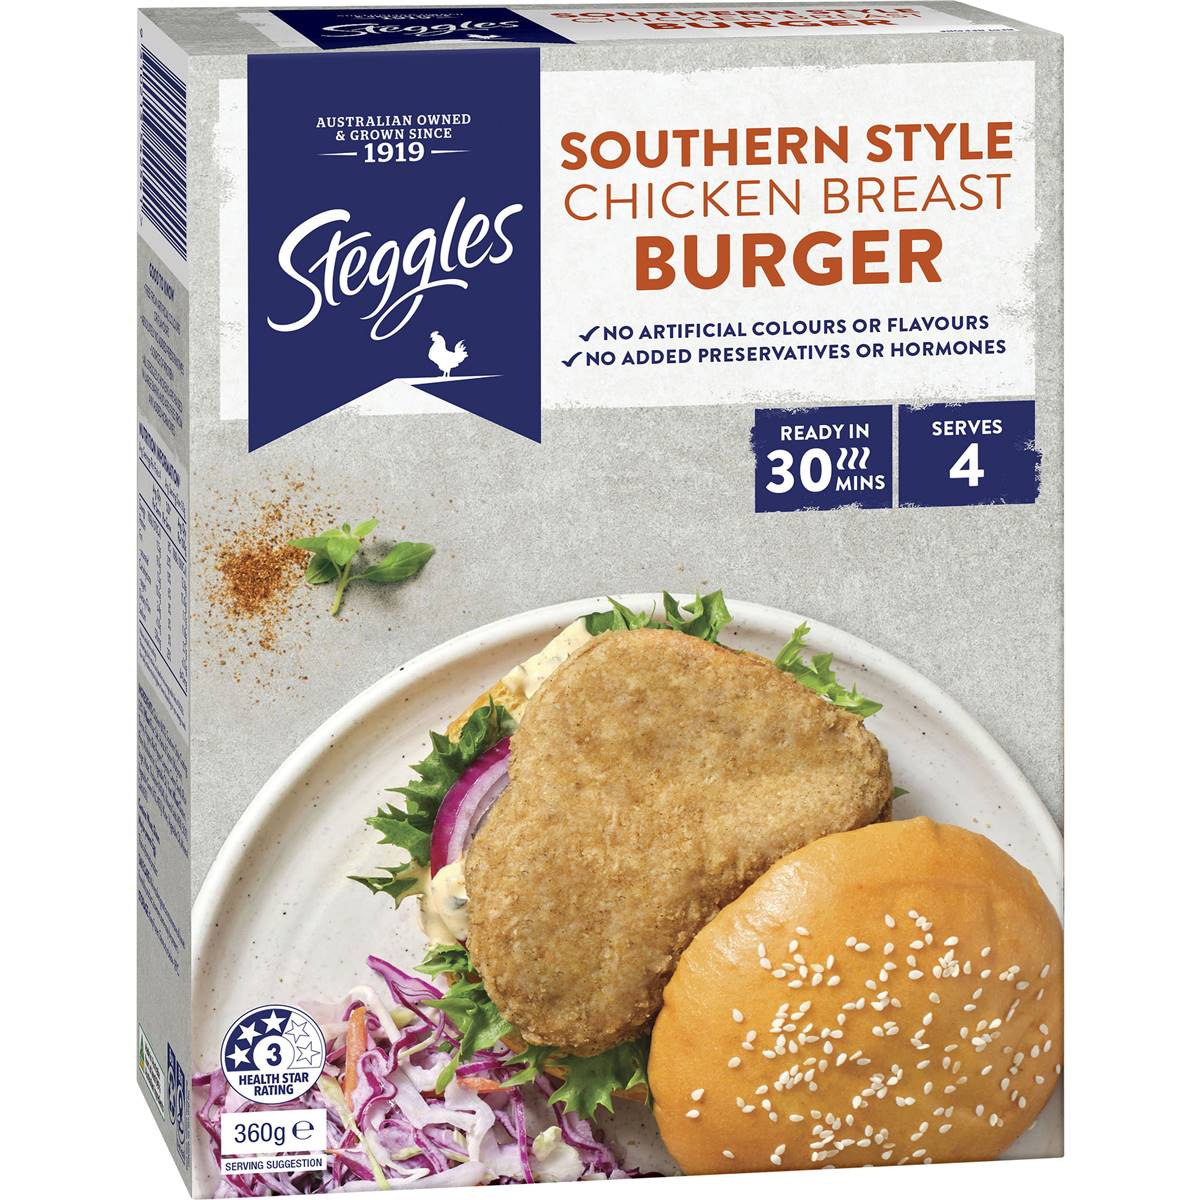 Calories in Steggles Southern Style Chicken Breast Burgers